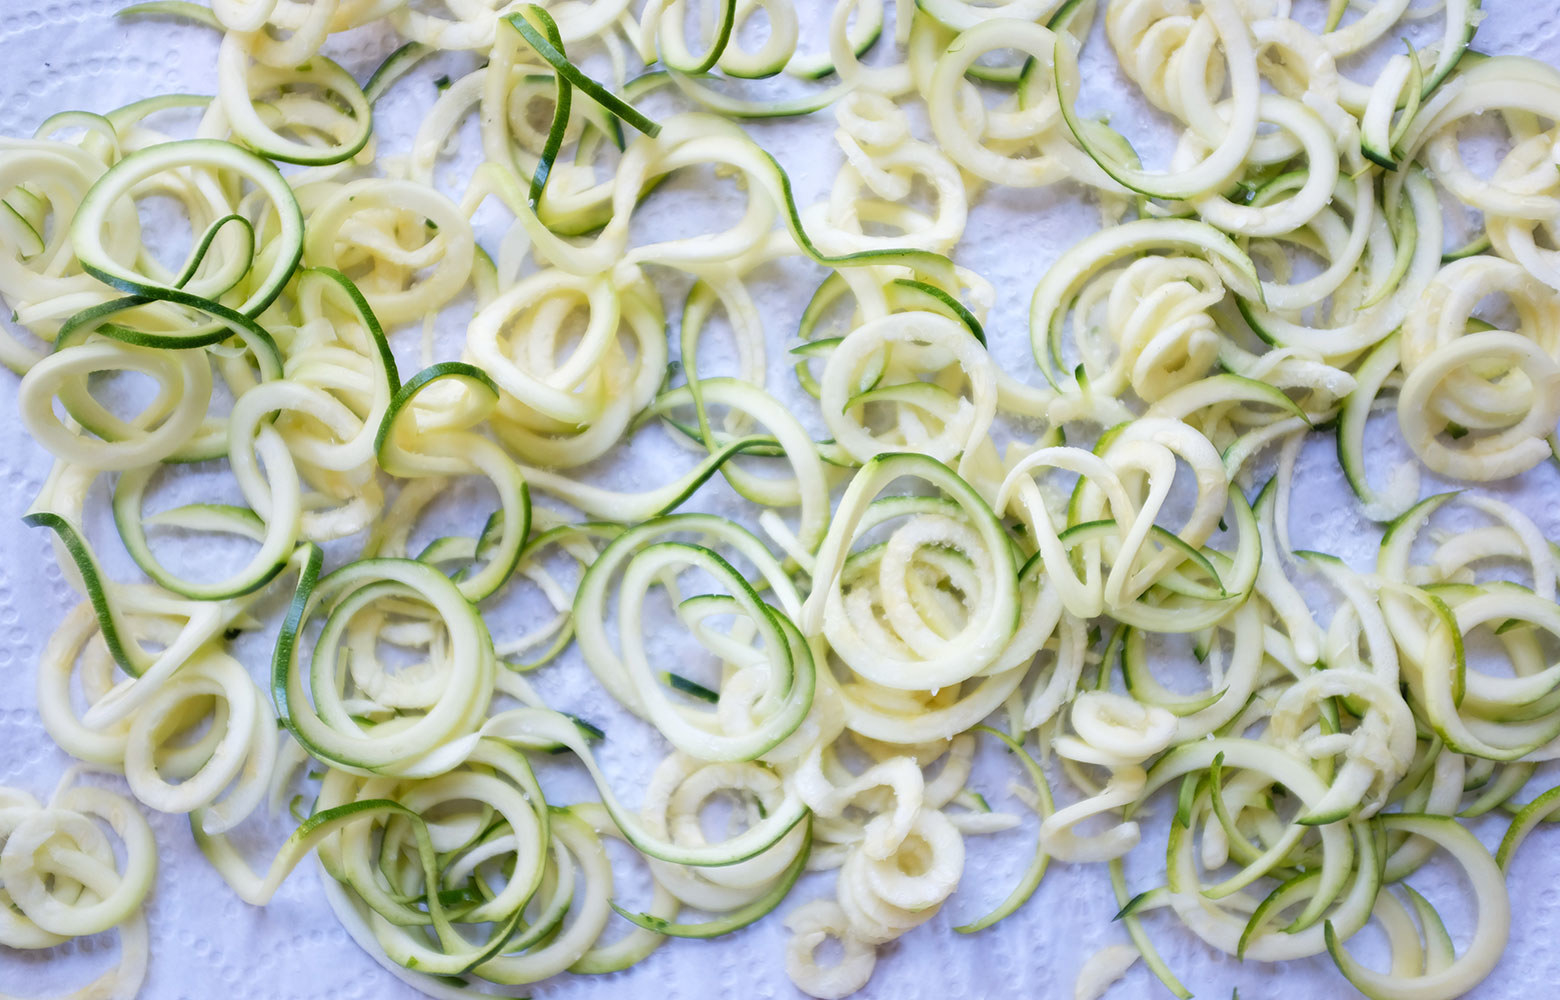 Why I Stopped Hating Zoodles